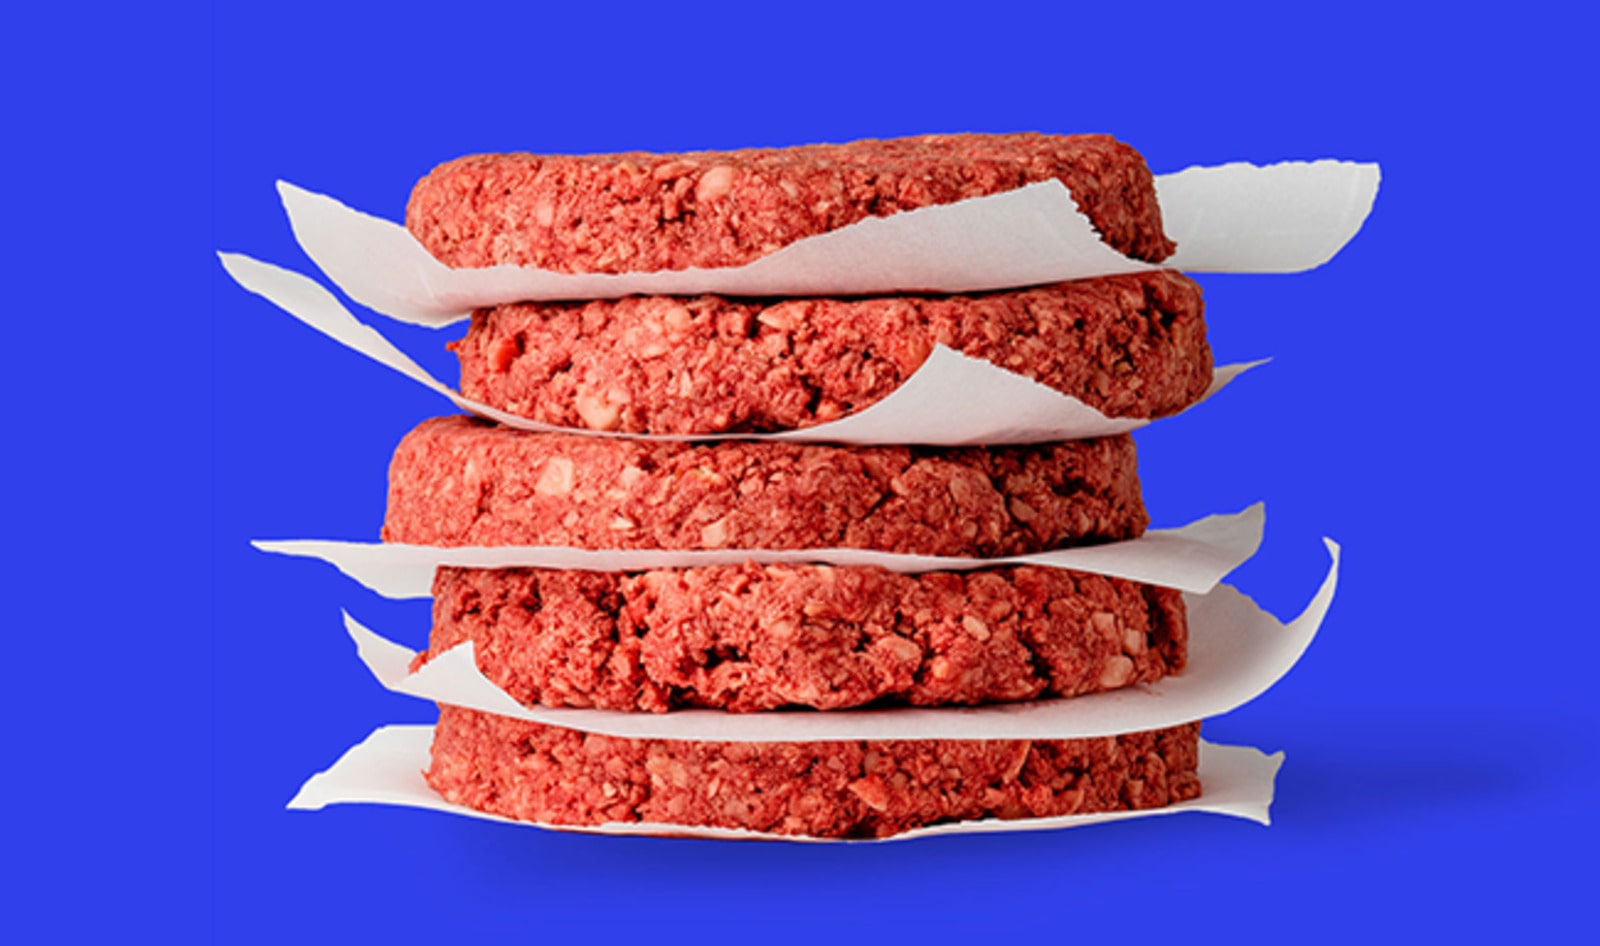 Impossible Foods Asserts Its Mission to Replace Food Animals by 2035